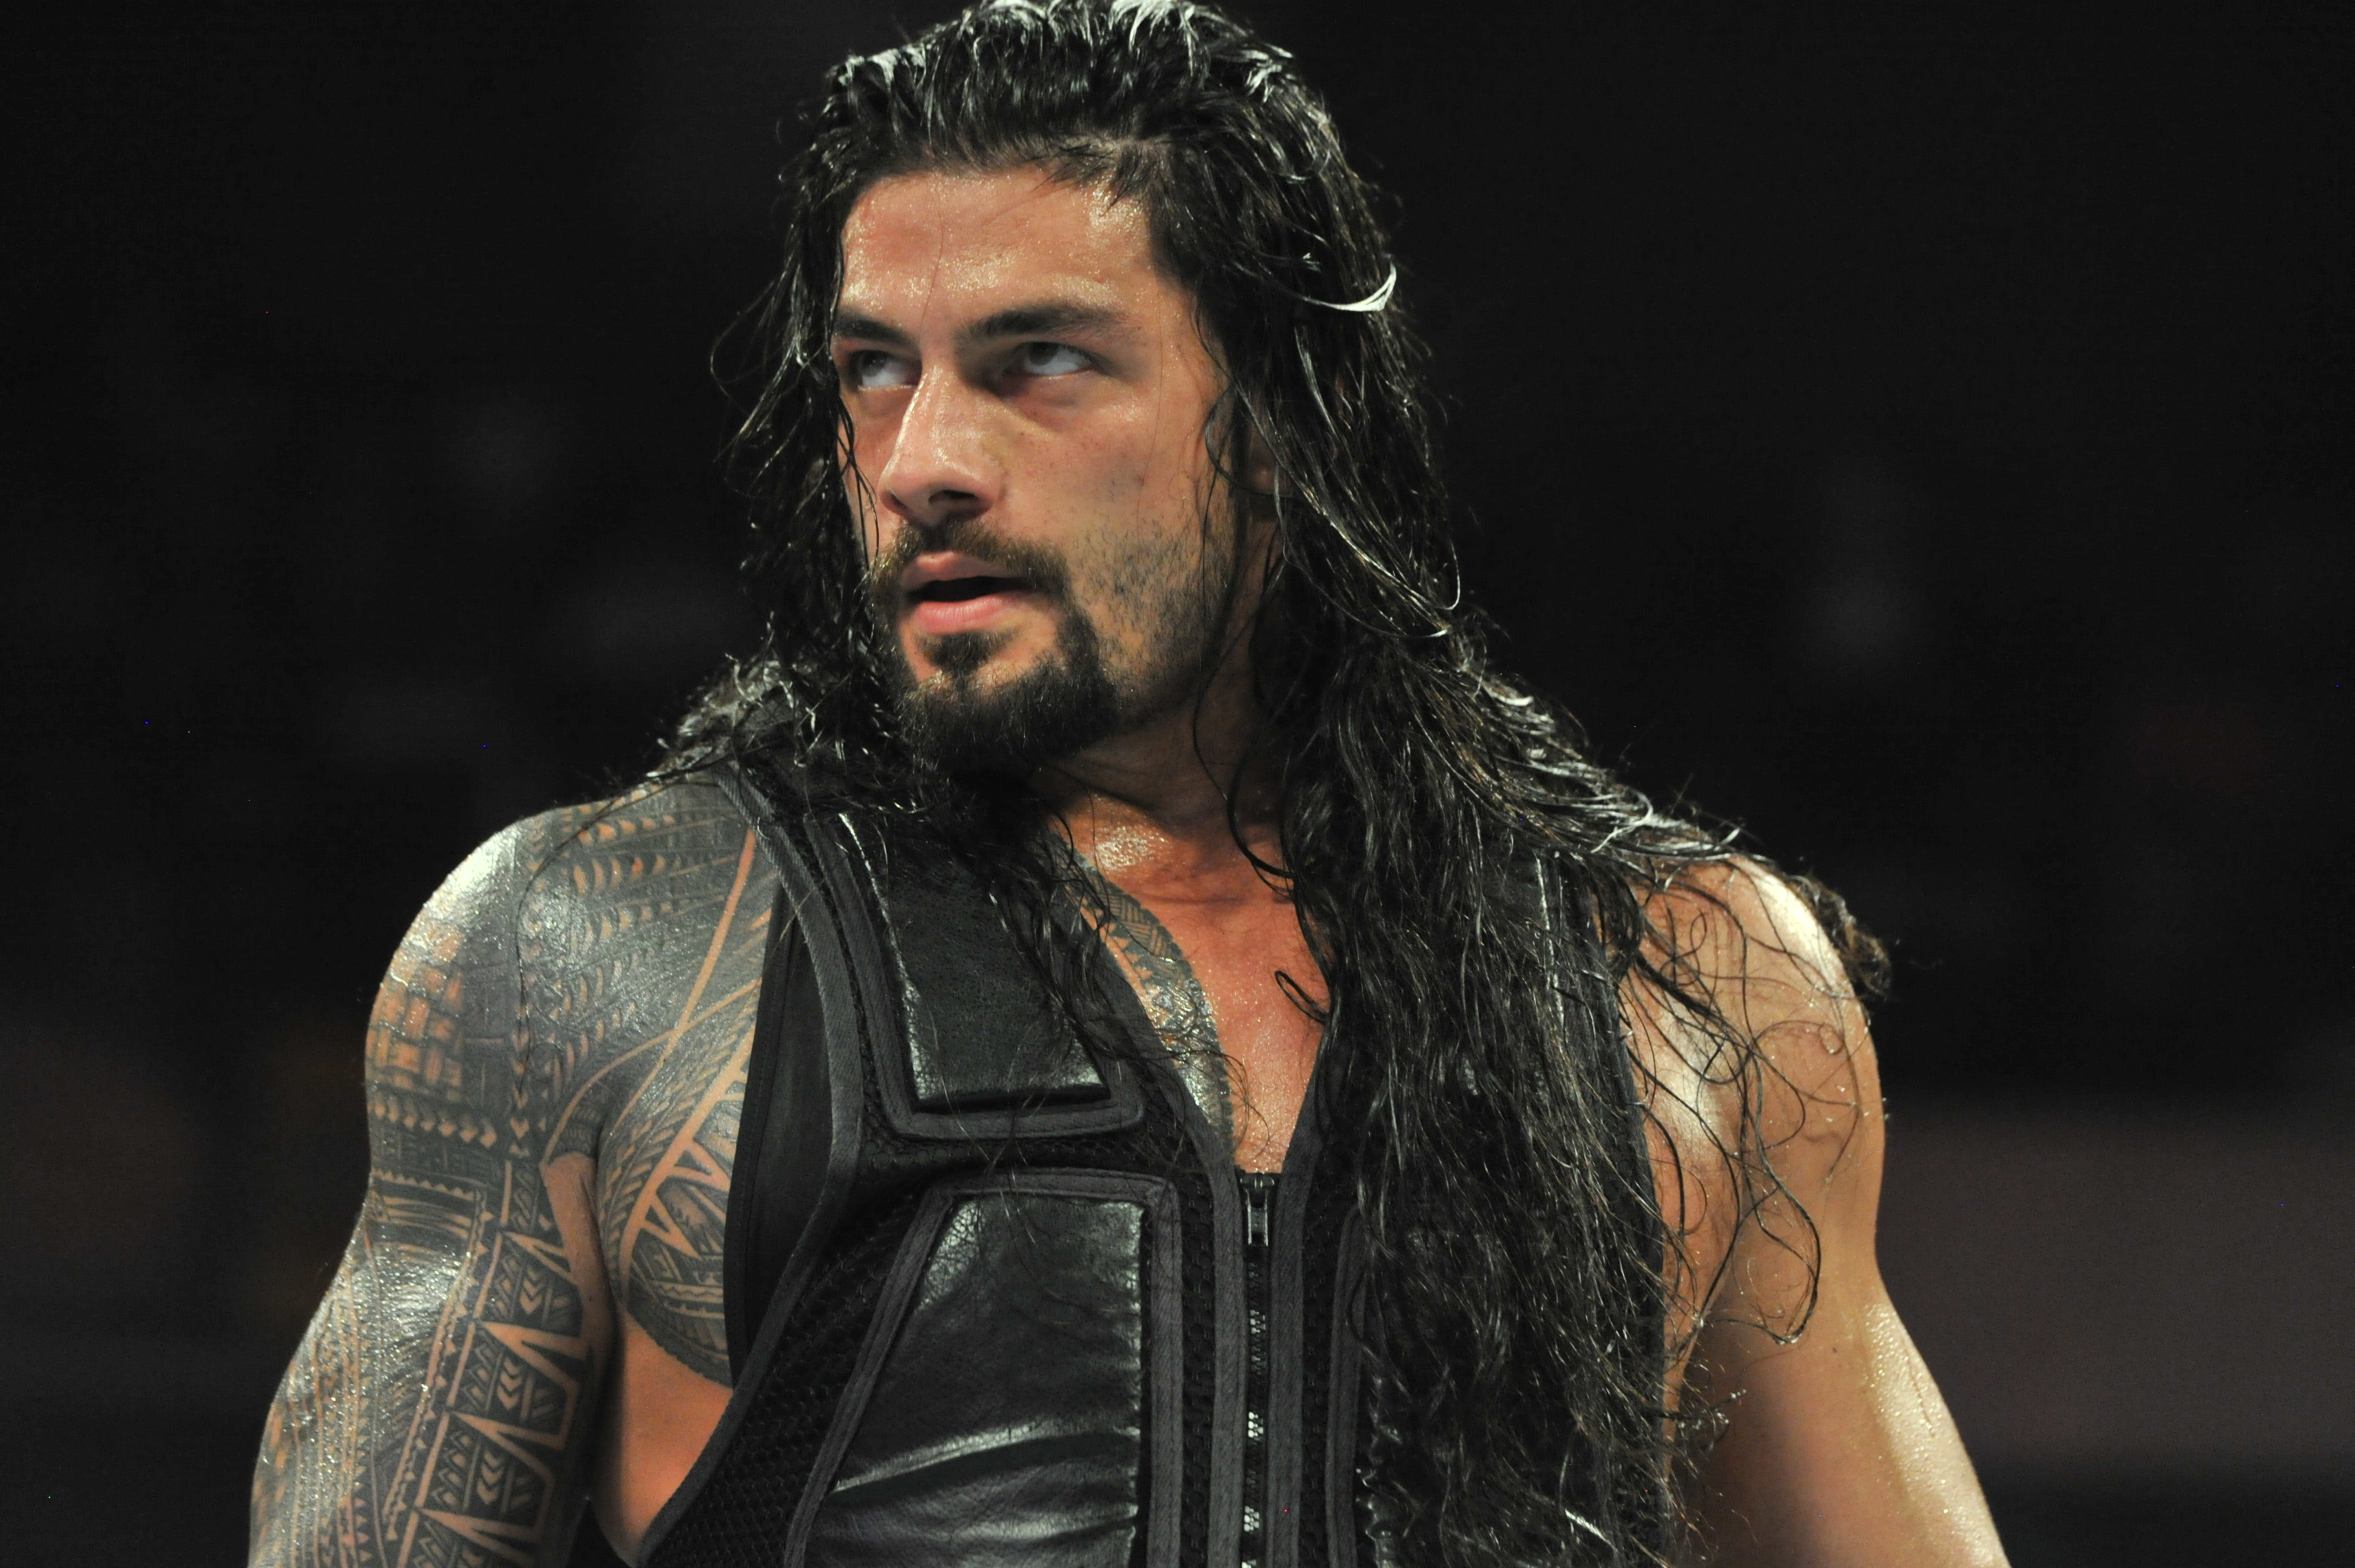 Former football star Joe Anoa'i now goes by Roman Reigns and is among the top stars in WWE (Photo: WWE).